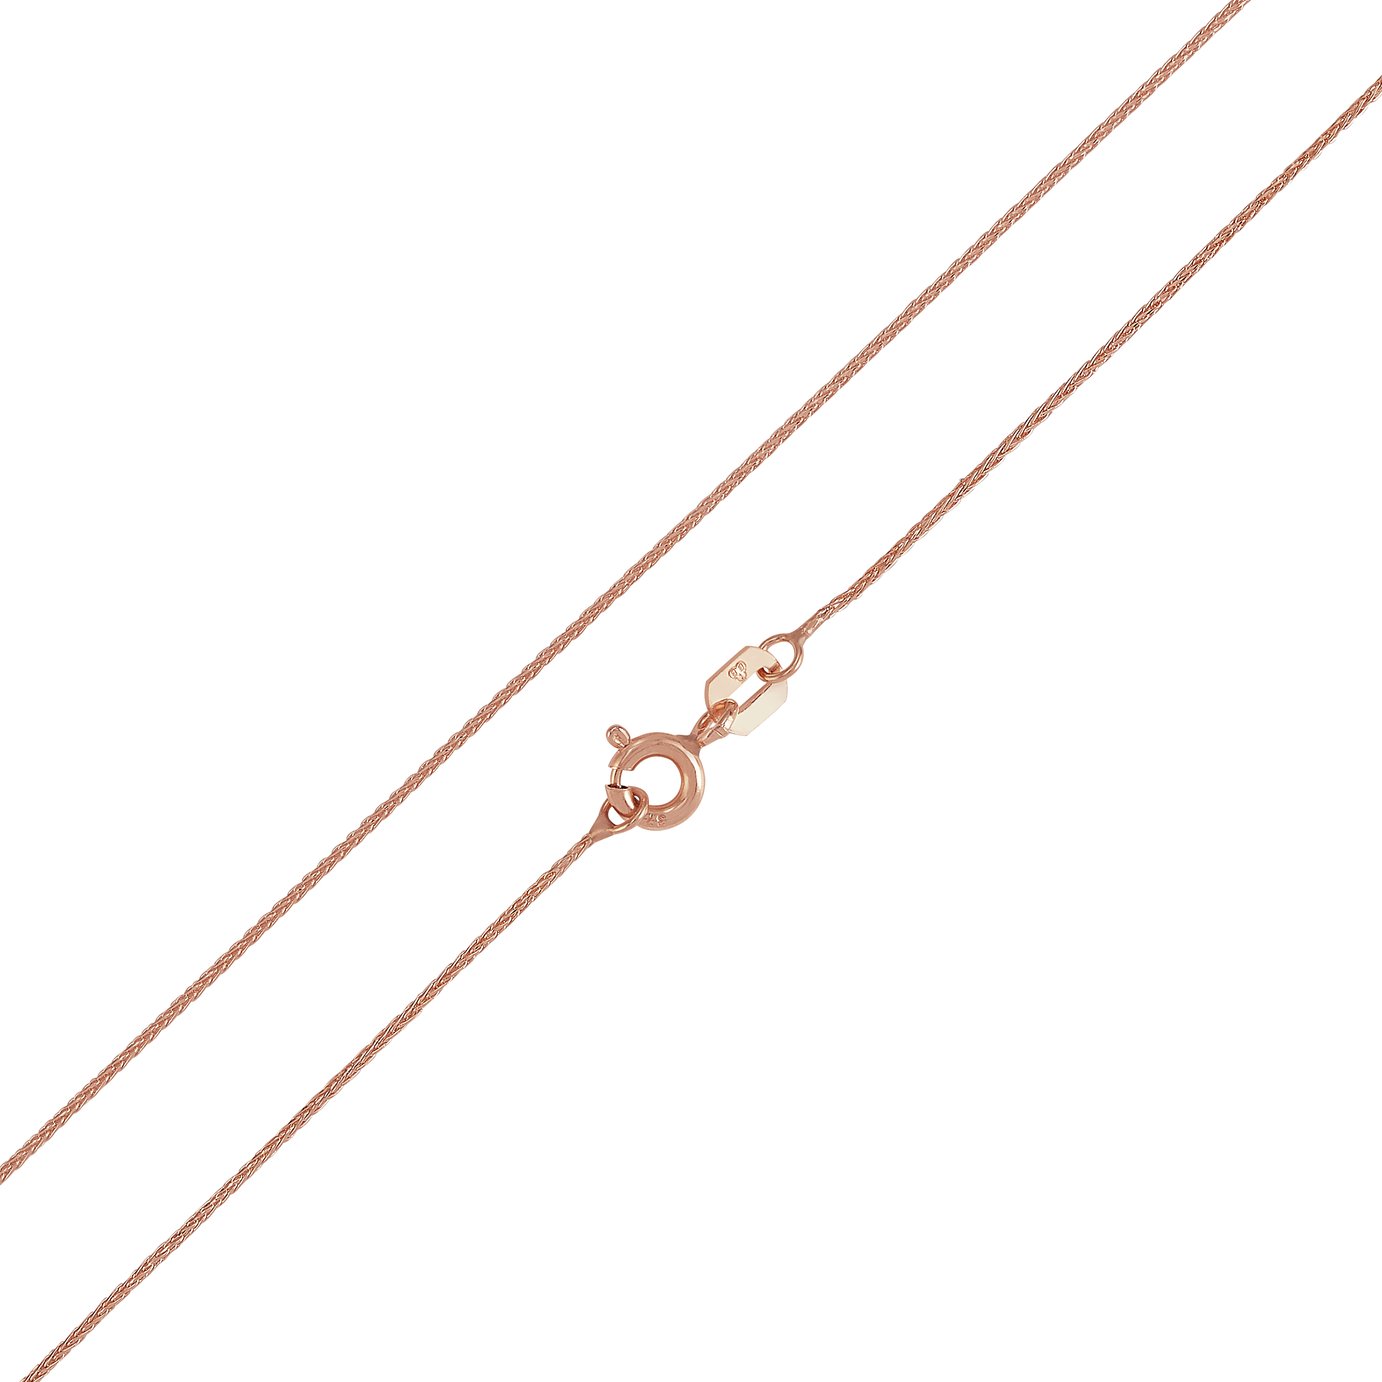 Revere 9ct Rose Gold Spiga 20 Inch Chain Reviews - Updated June 2023